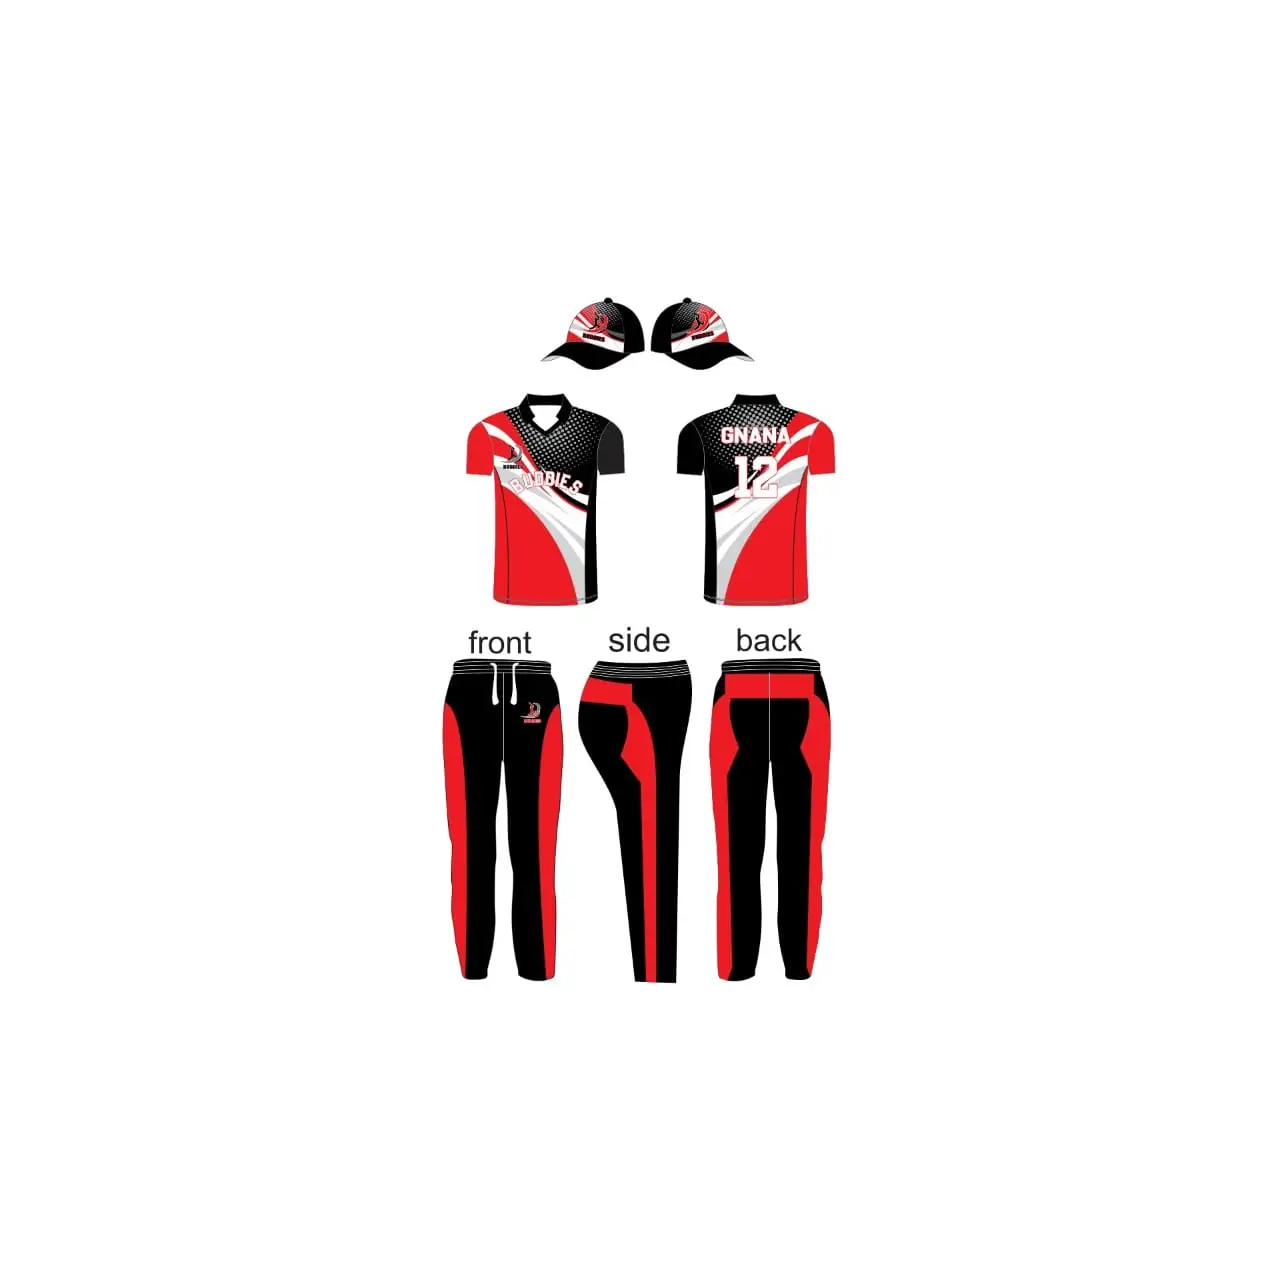 Customized Cricket Uniform With Team And Player Name And Number - Black Silver Red - Custom Cricket Wear 3PC Full